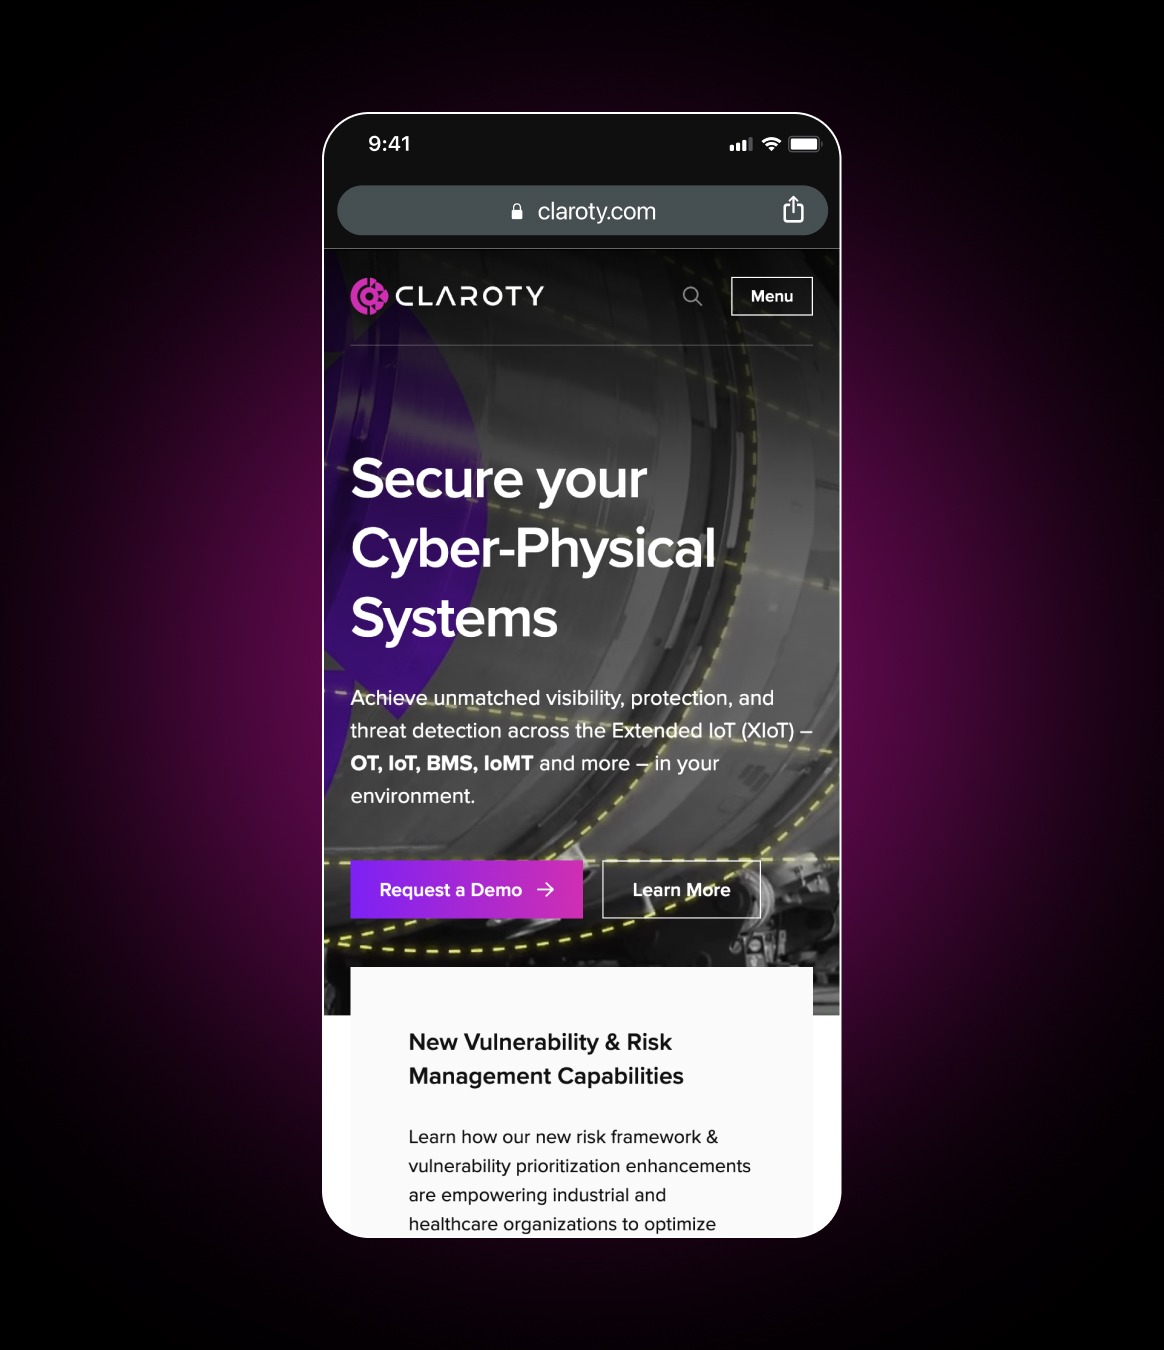 Showcase of the Claroty website in a mobile responsive layout